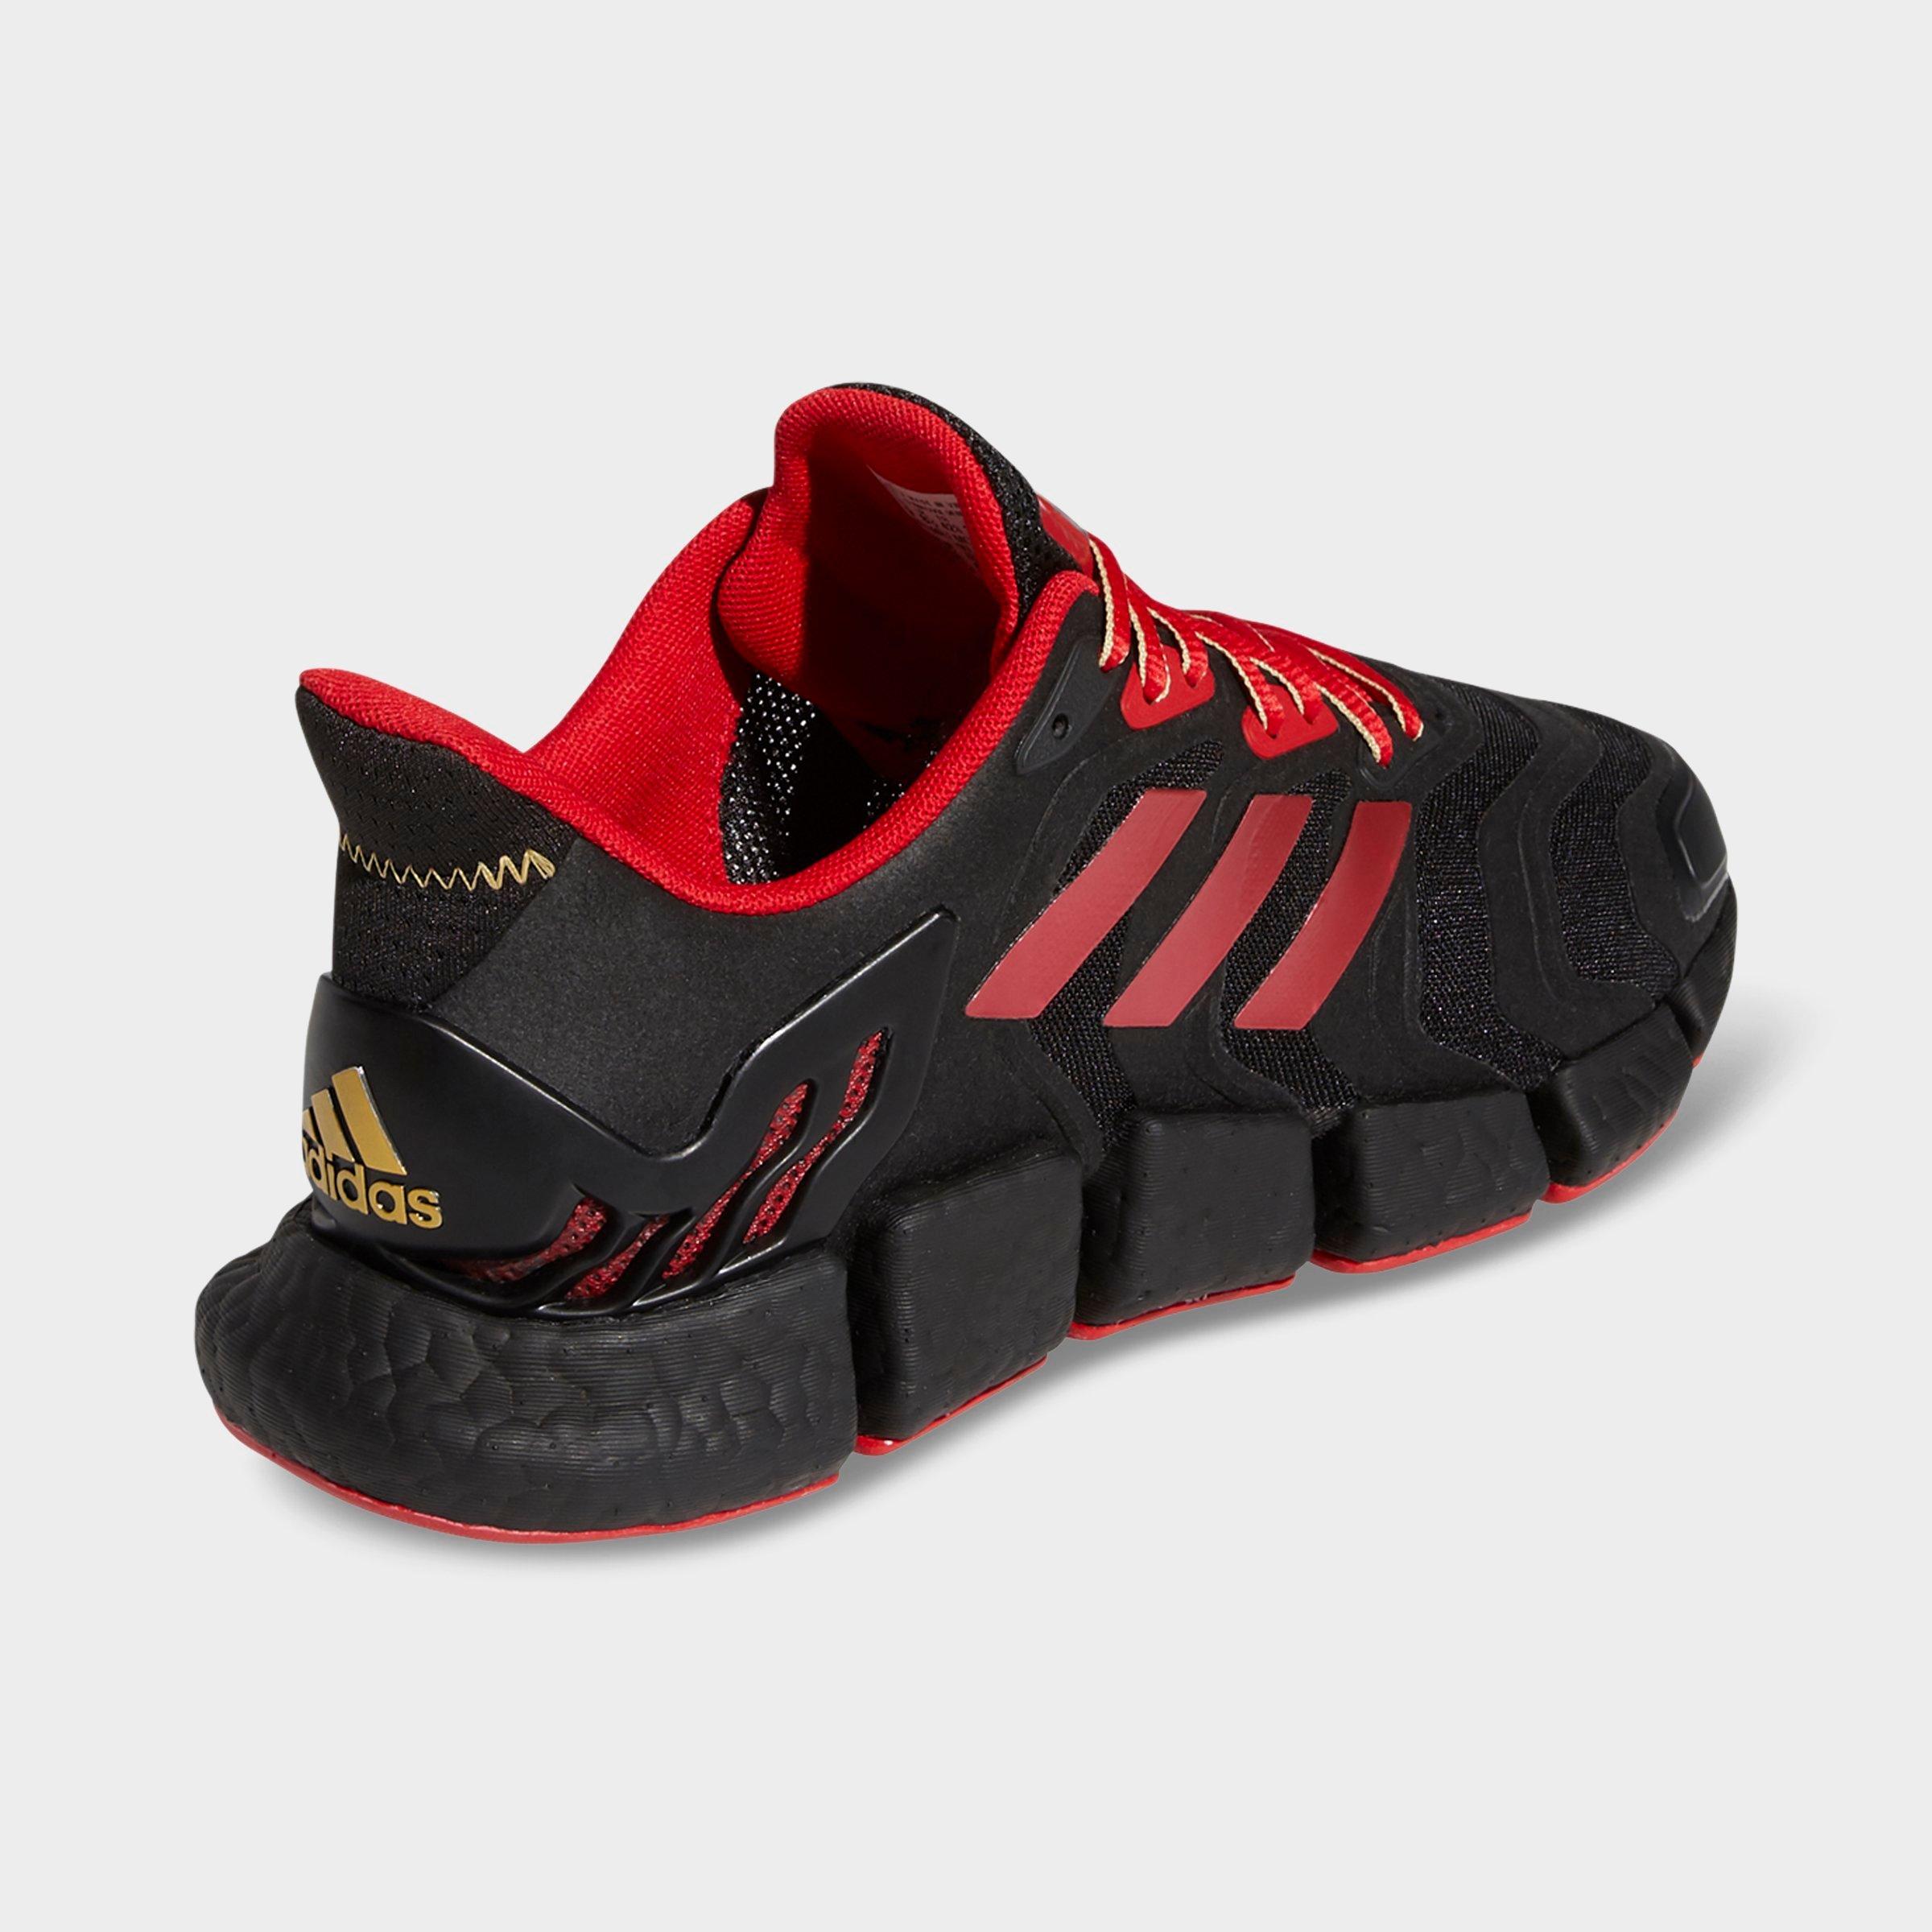 red adidas climacool shoes